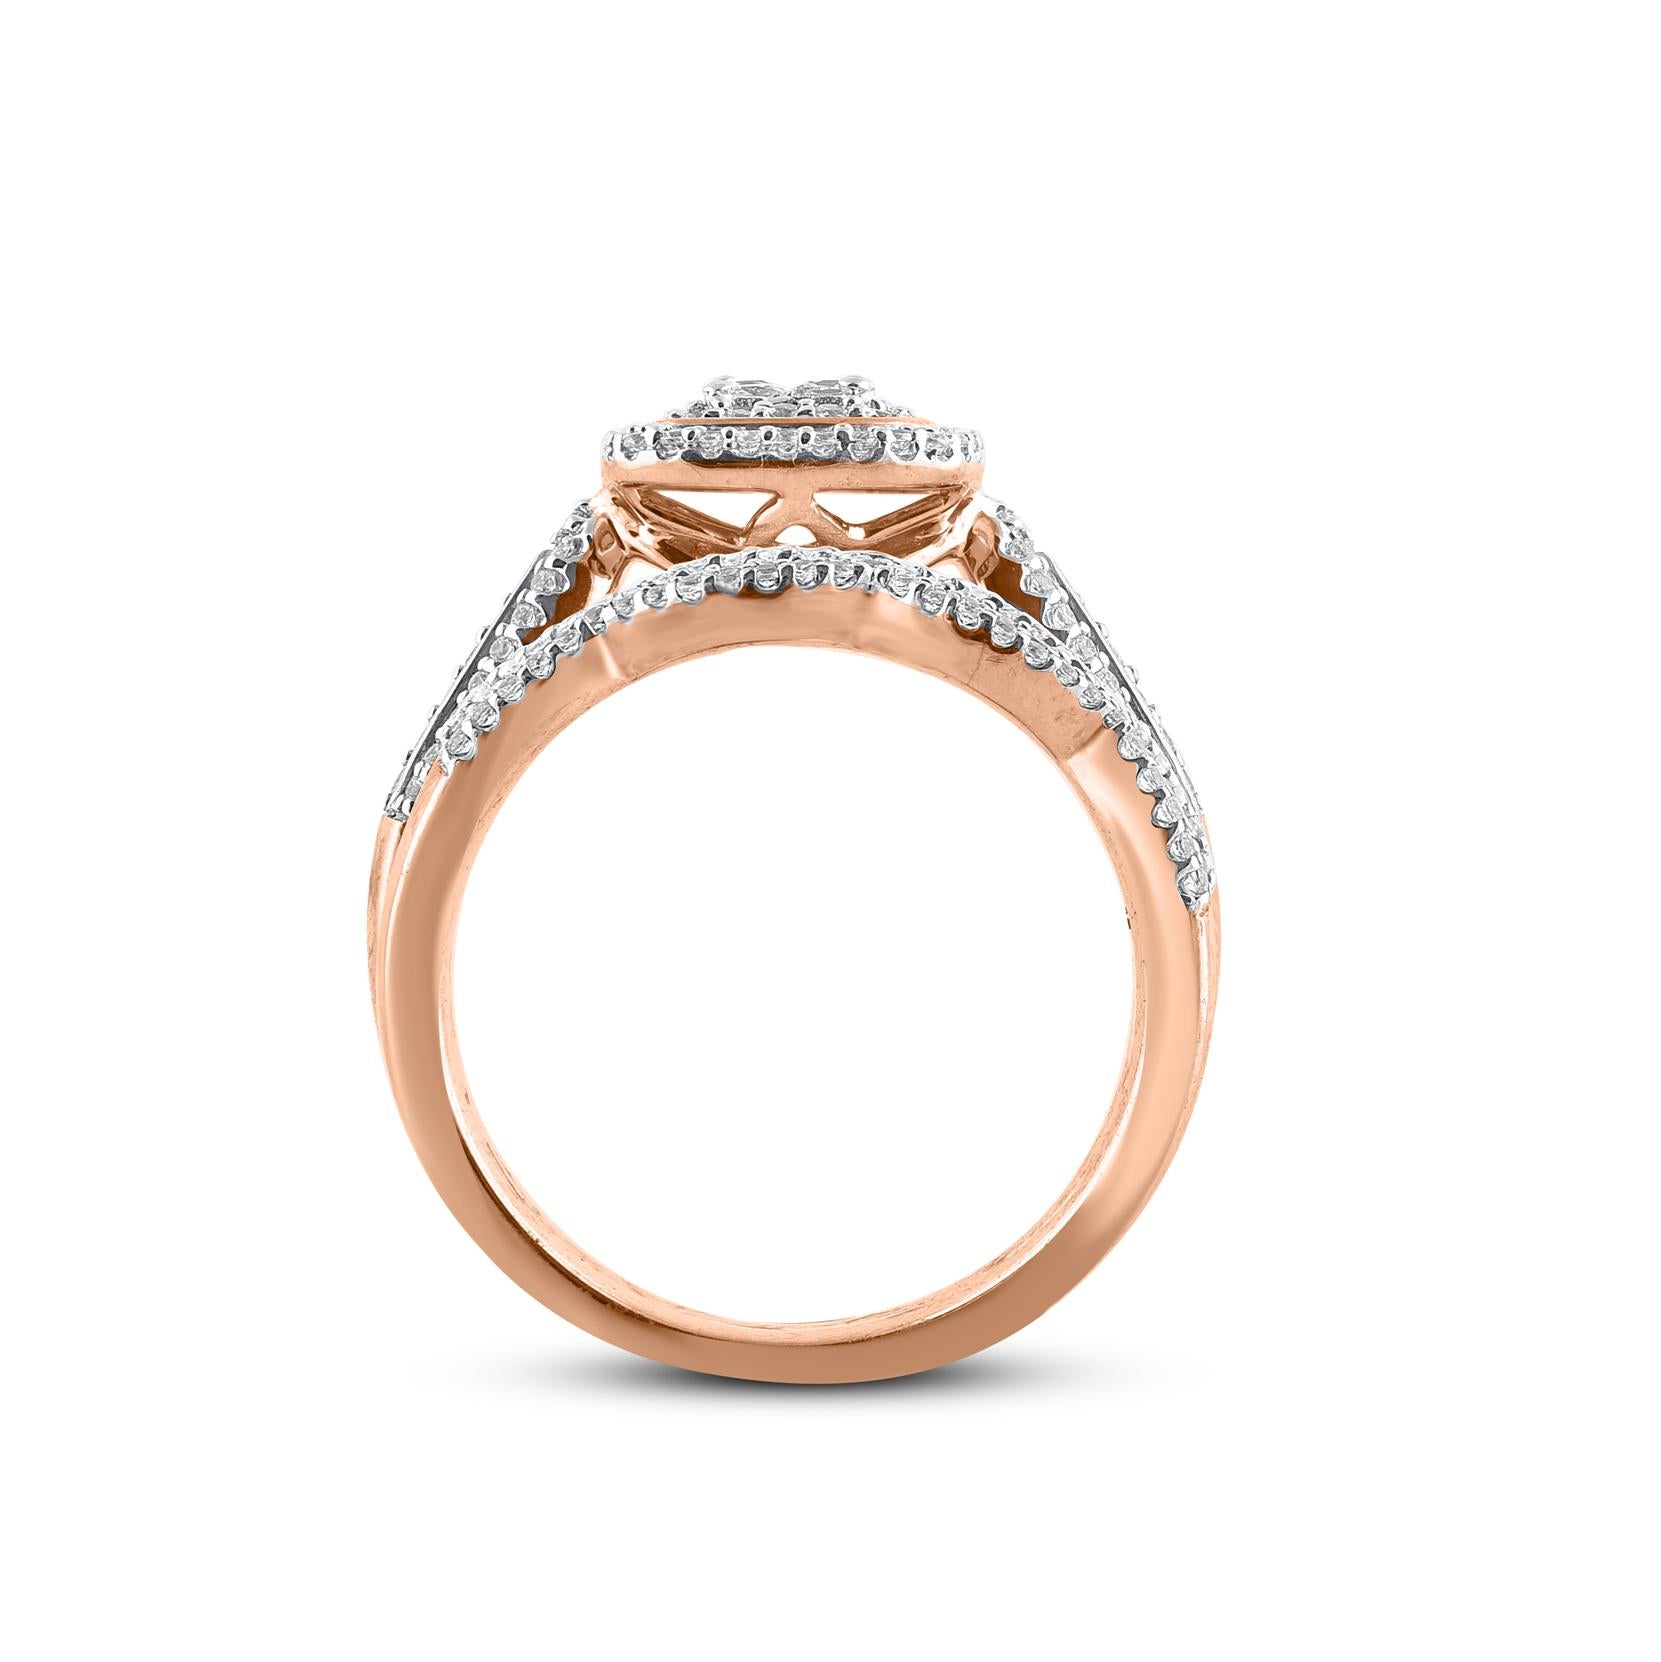 Women's TJD 0.65 Carat Round and Princess Cut Diamond 14KT Rose Gold Bridal Ring Set For Sale